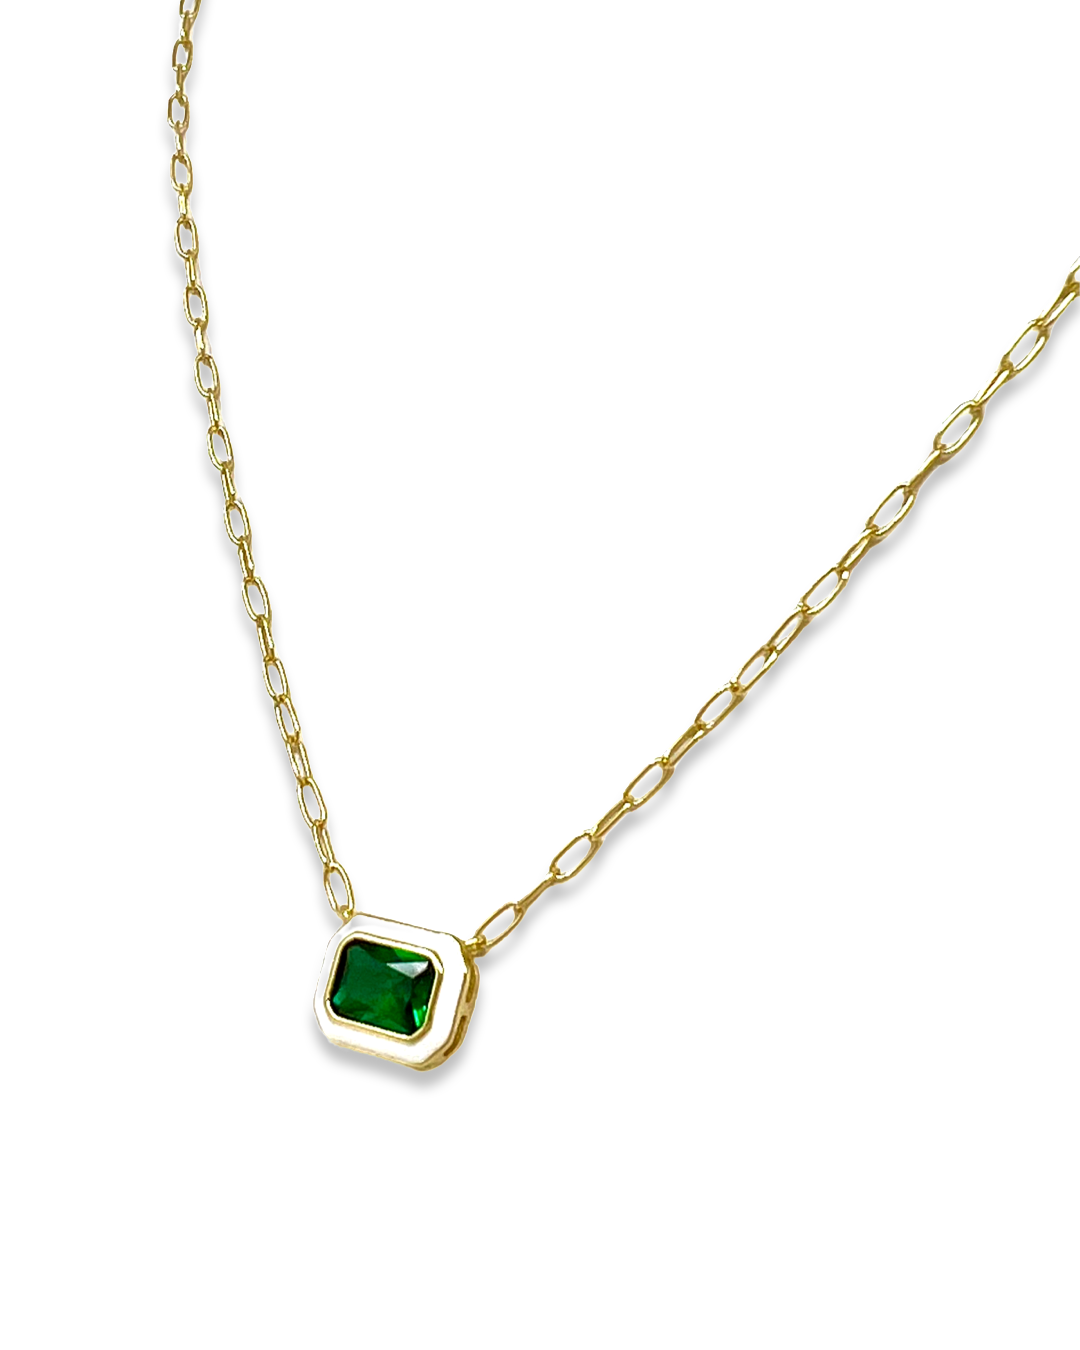 Gatsby Necklace in Emerald Green